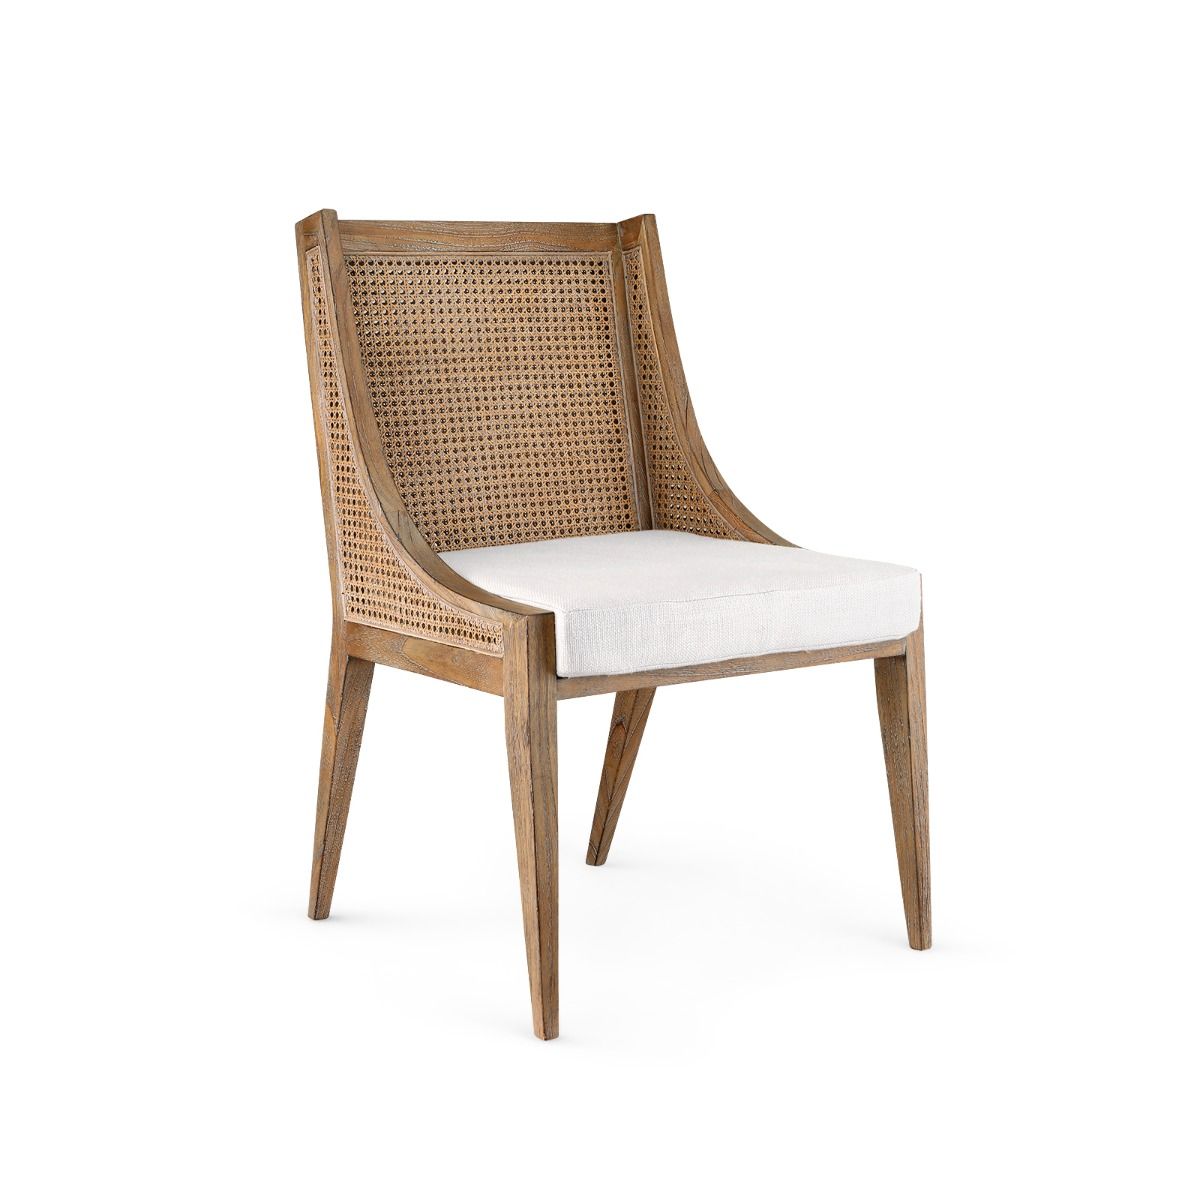 Load image into Gallery viewer, Raleigh Armchair DriftwoodDining Chair Bungalow 5  Driftwood   Four Hands, Burke Decor, Mid Century Modern Furniture, Old Bones Furniture Company, Old Bones Co, Modern Mid Century, Designer Furniture, https://www.oldbonesco.com/
